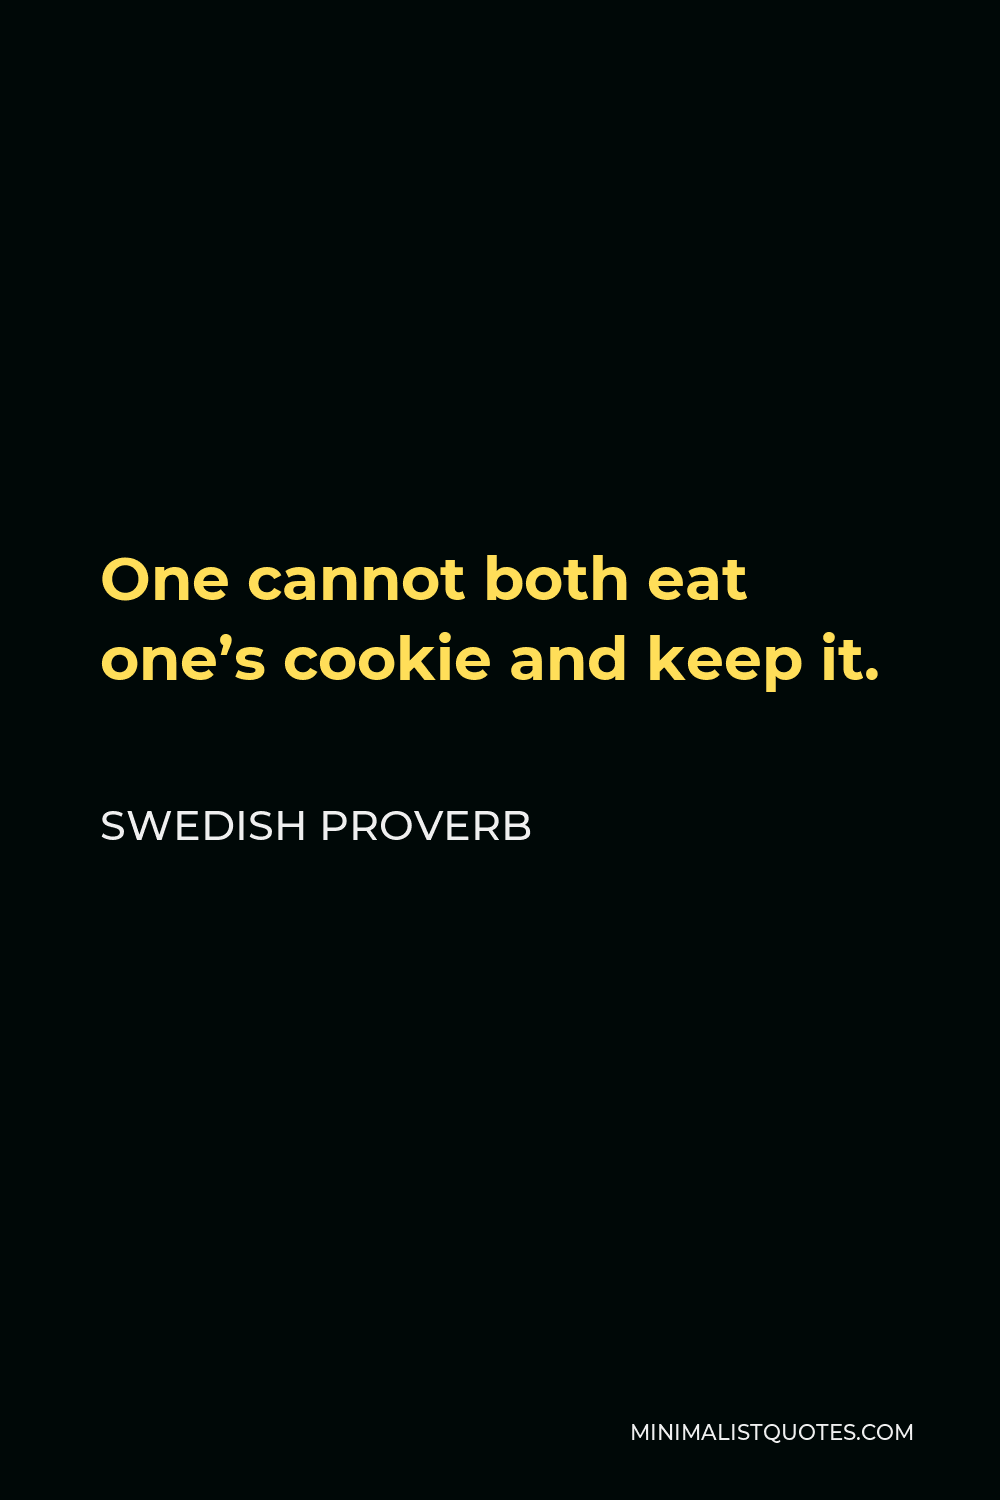 Swedish Proverb Quote - One cannot both eat one’s cookie and keep it.